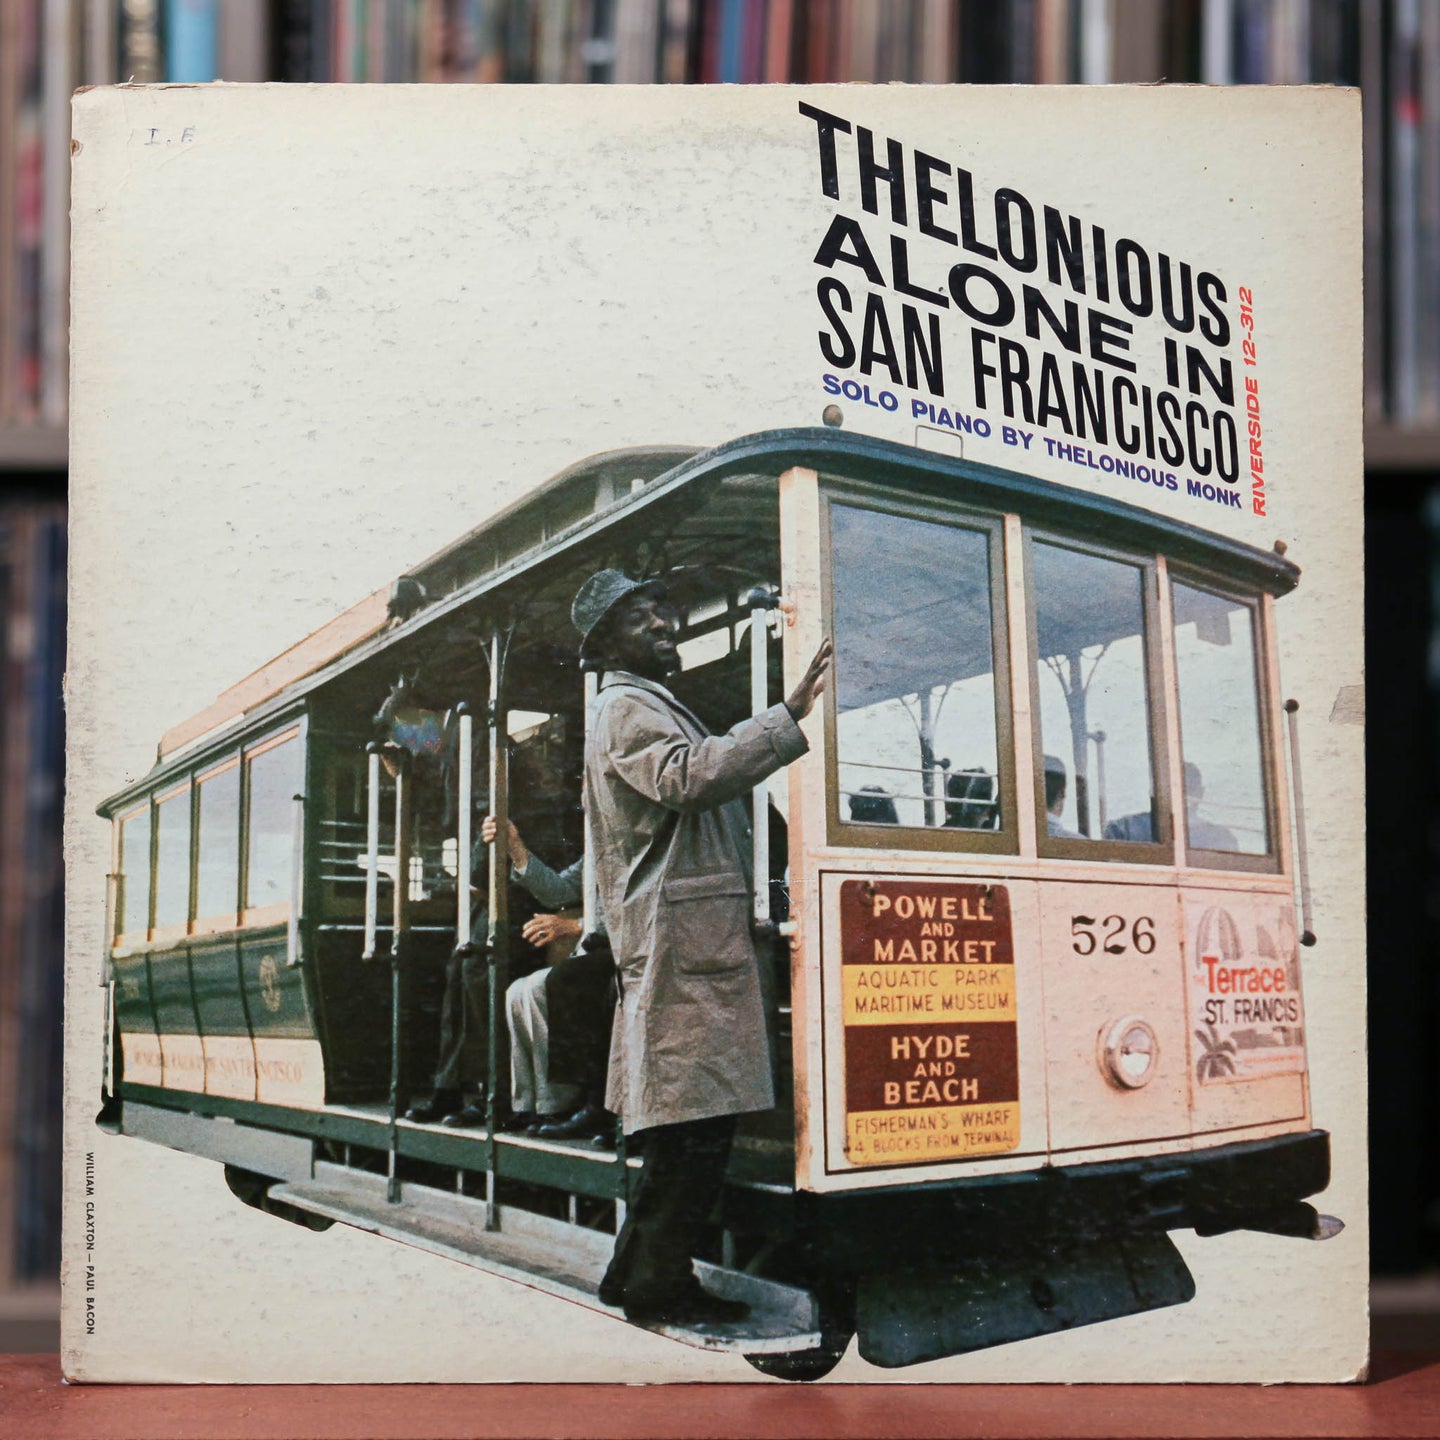 Thelonious Monk - Alone in San Francisco - 1960 Riverside - VG/EX